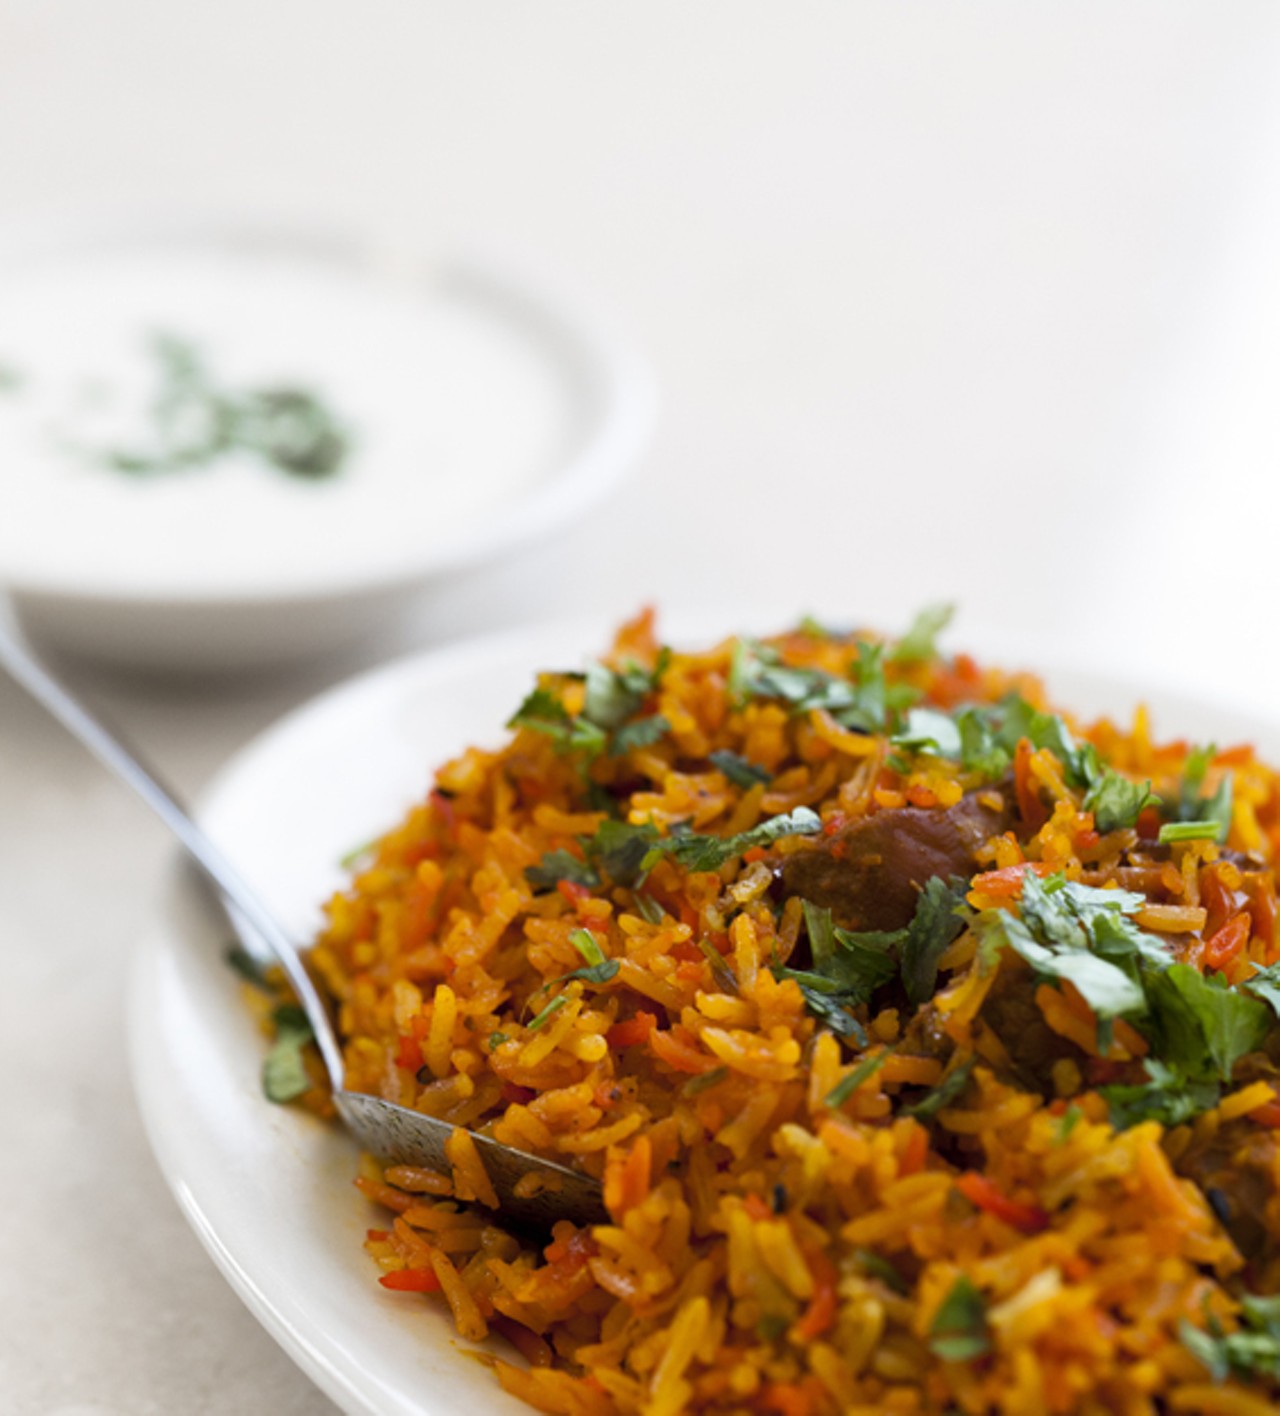 Chicken Biryani is basmati rice cooked with chicken and spices. (The Biryani is also available with chick peas, goat or lamb).